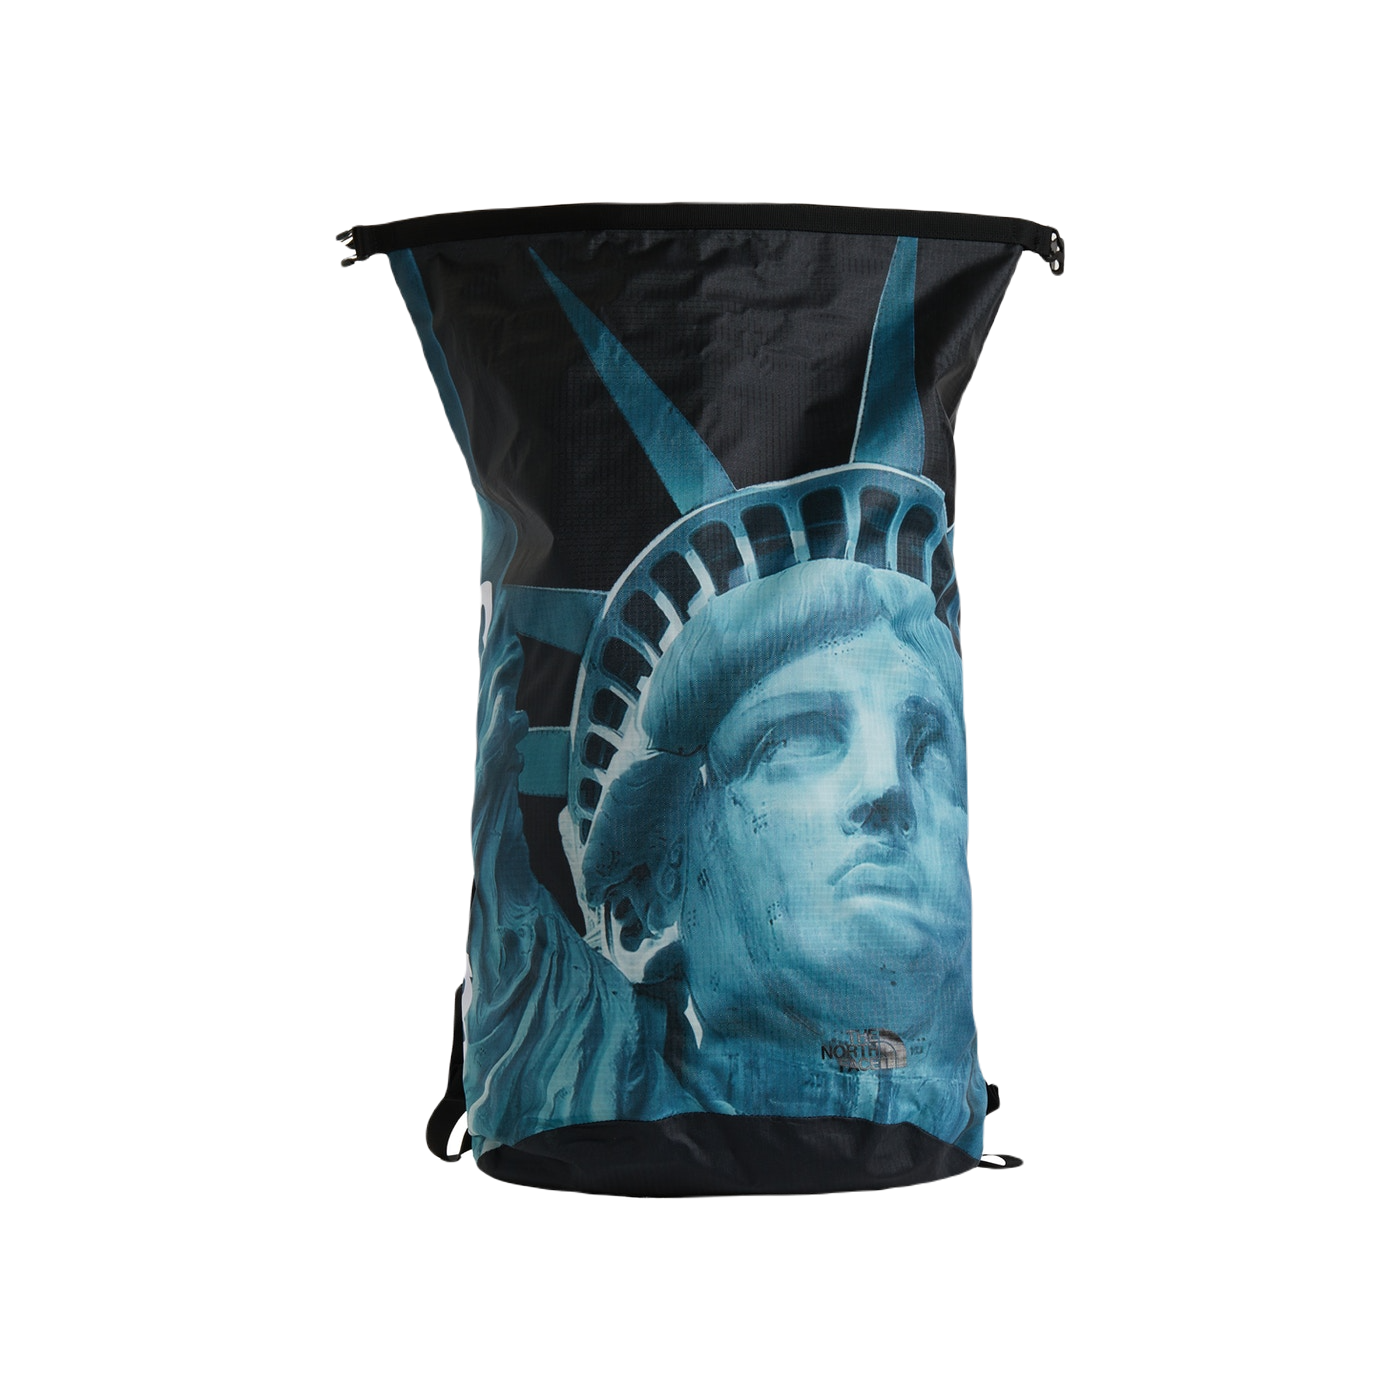 Supreme x The North Face Statue of Liberty Waterproof Backpack - Black